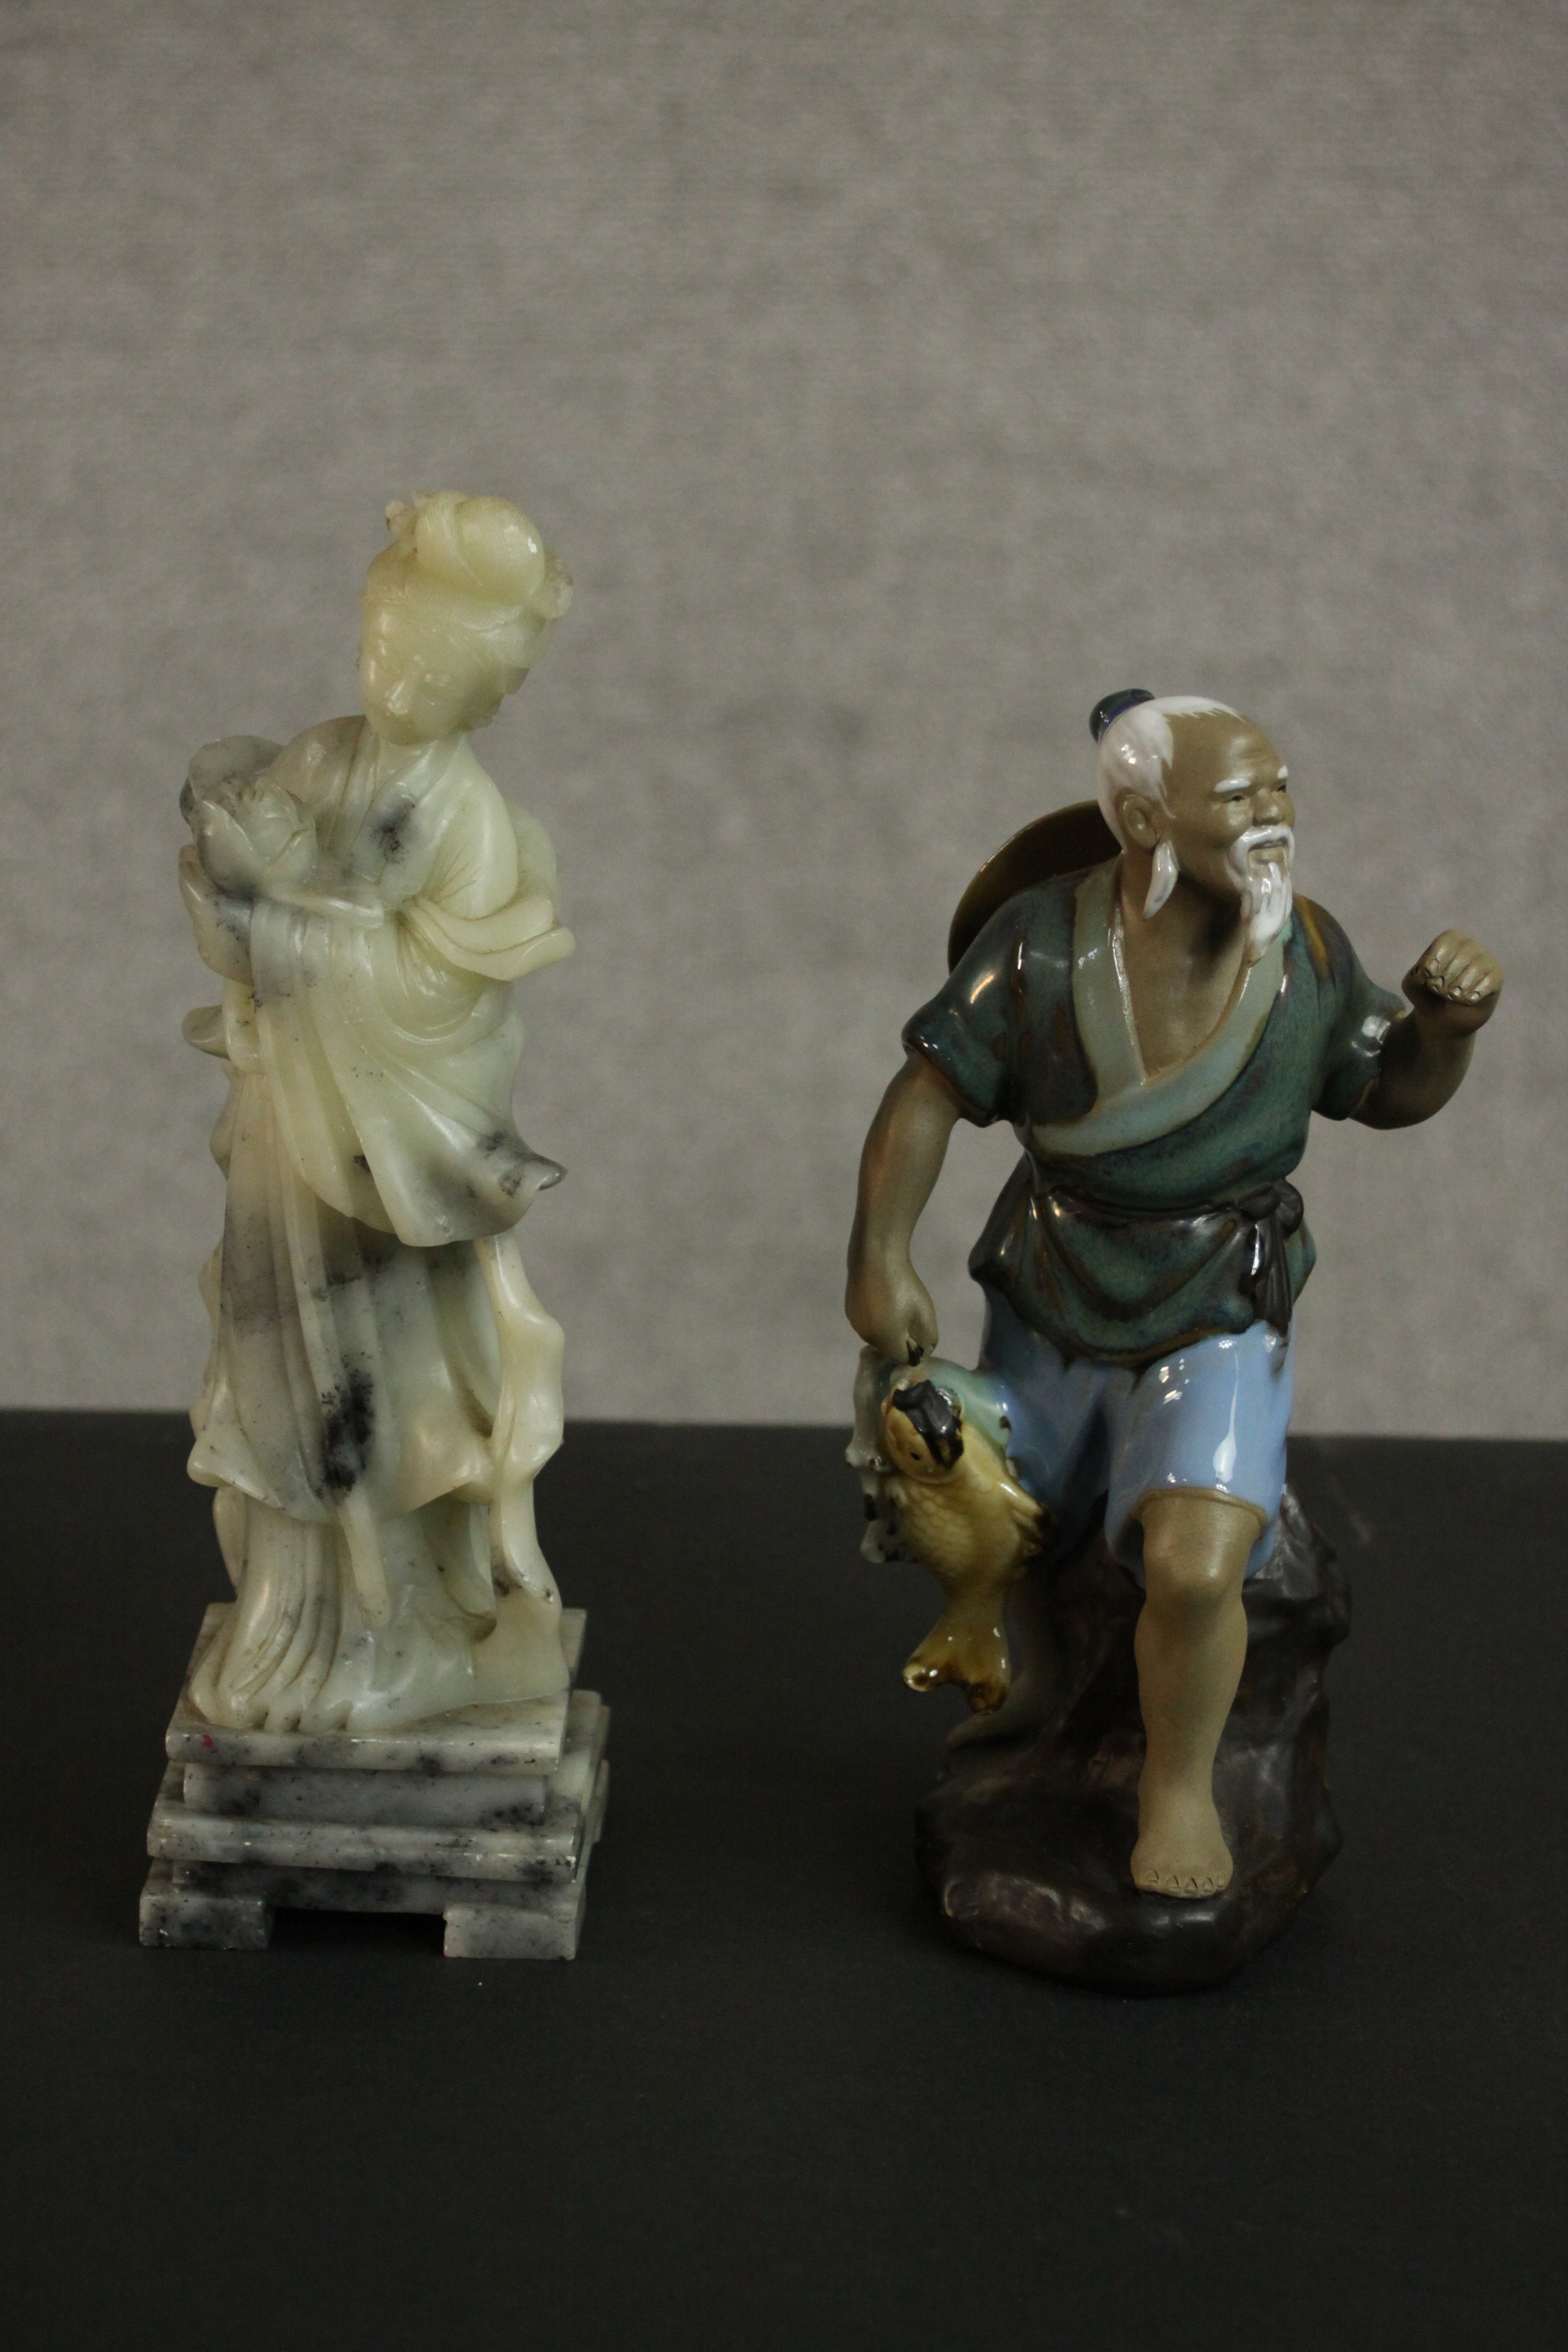 A carved Chinese soapstone figure of a female deity along with a hand painted clay figure of a